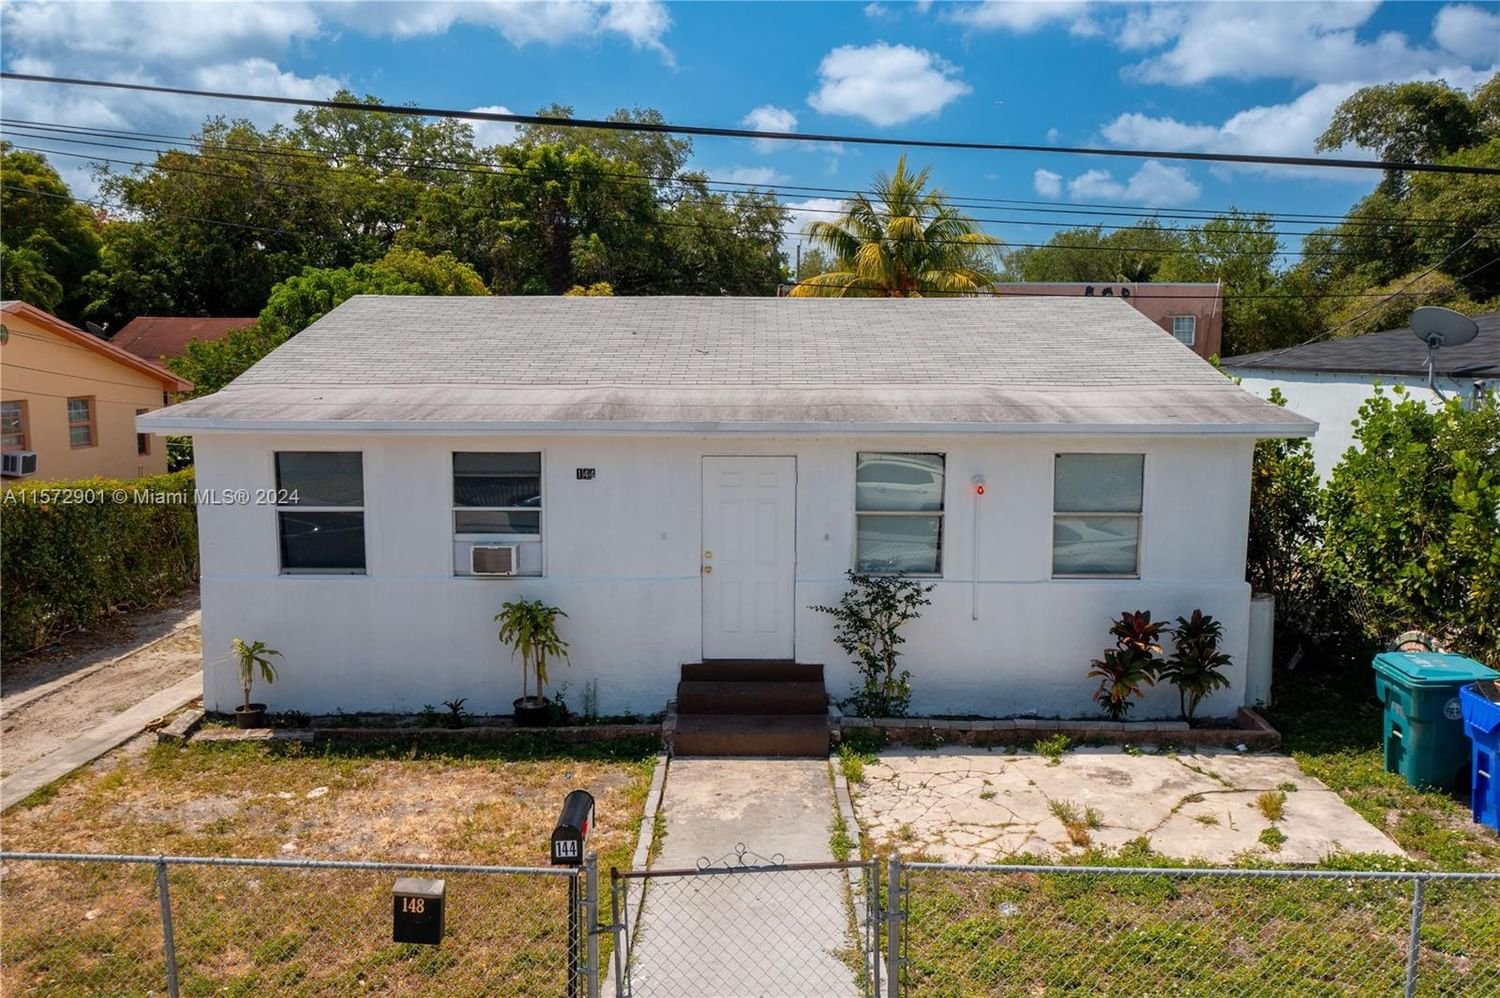 Real estate property located at 144 53rd St, Miami-Dade County, RAILWAY SHOPS ADDN 2ND AM, Miami, FL